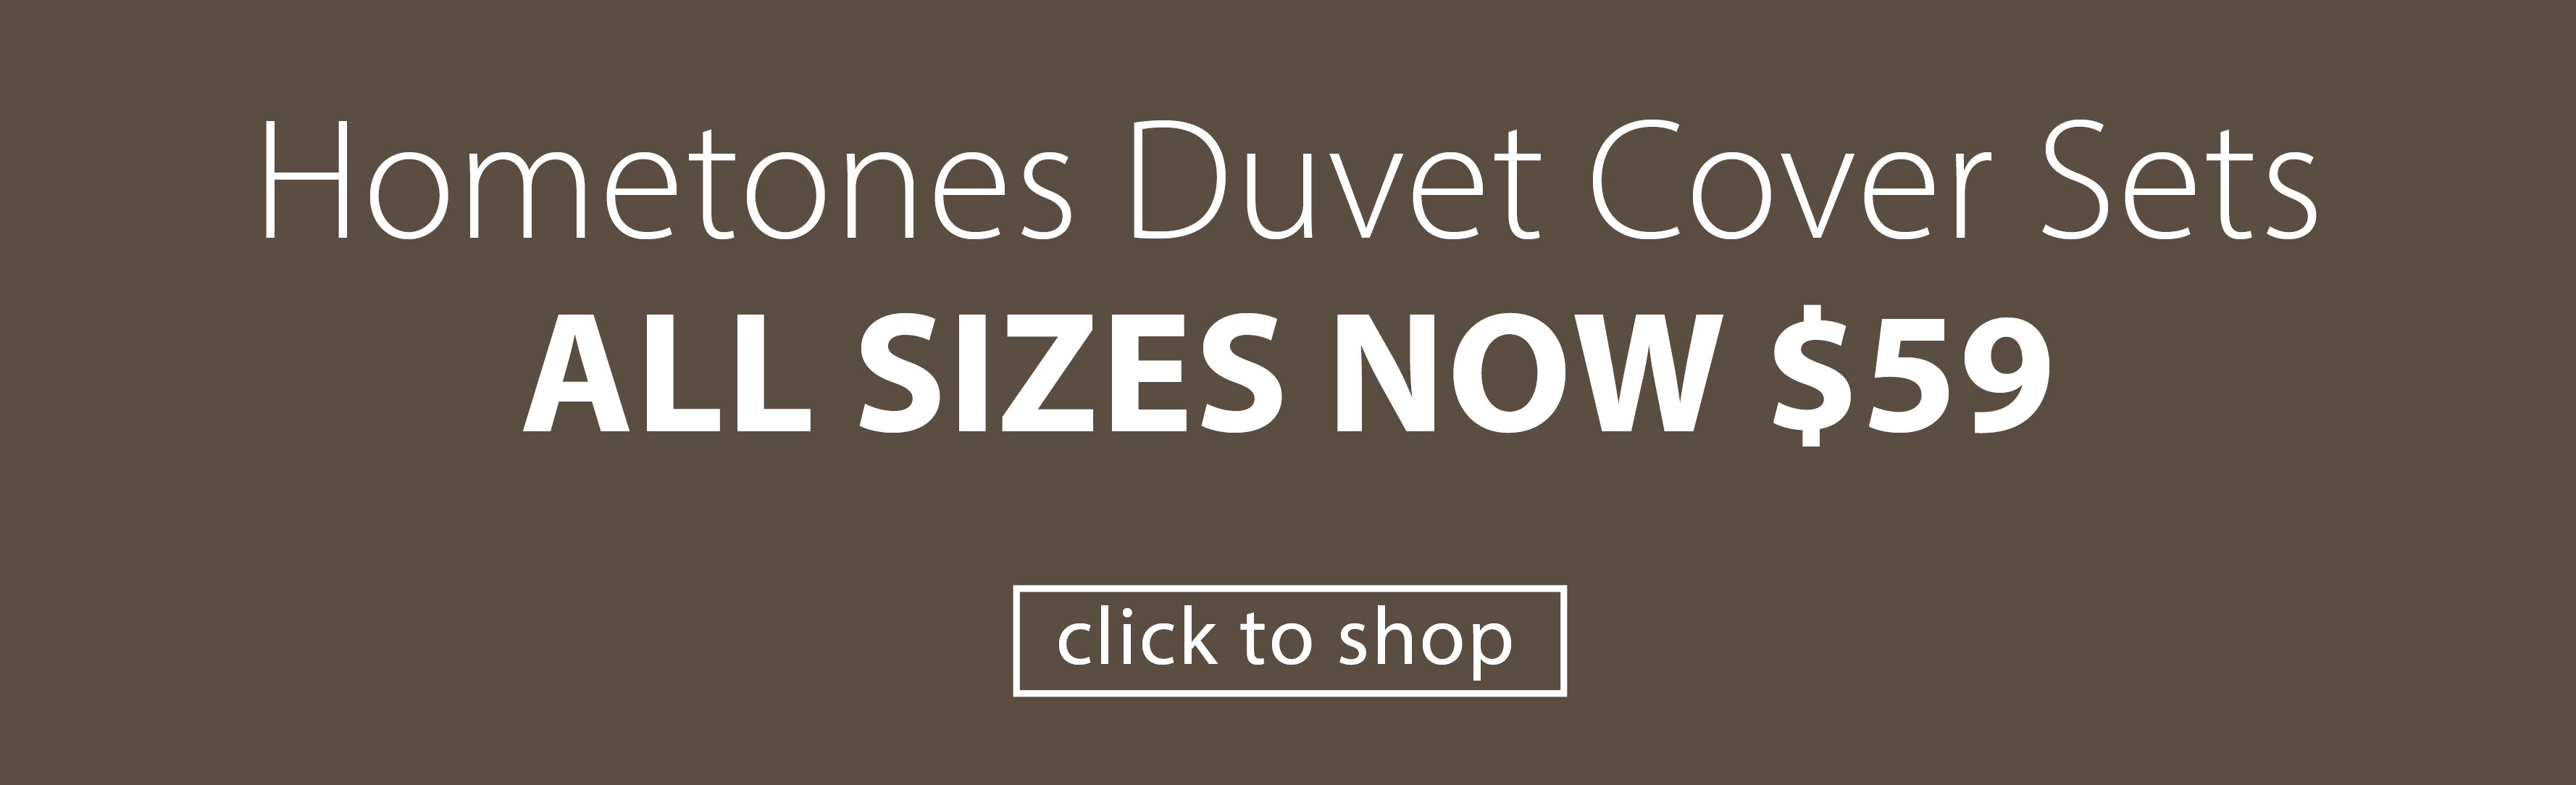 Hometone duvet cover sets all sizes now $59